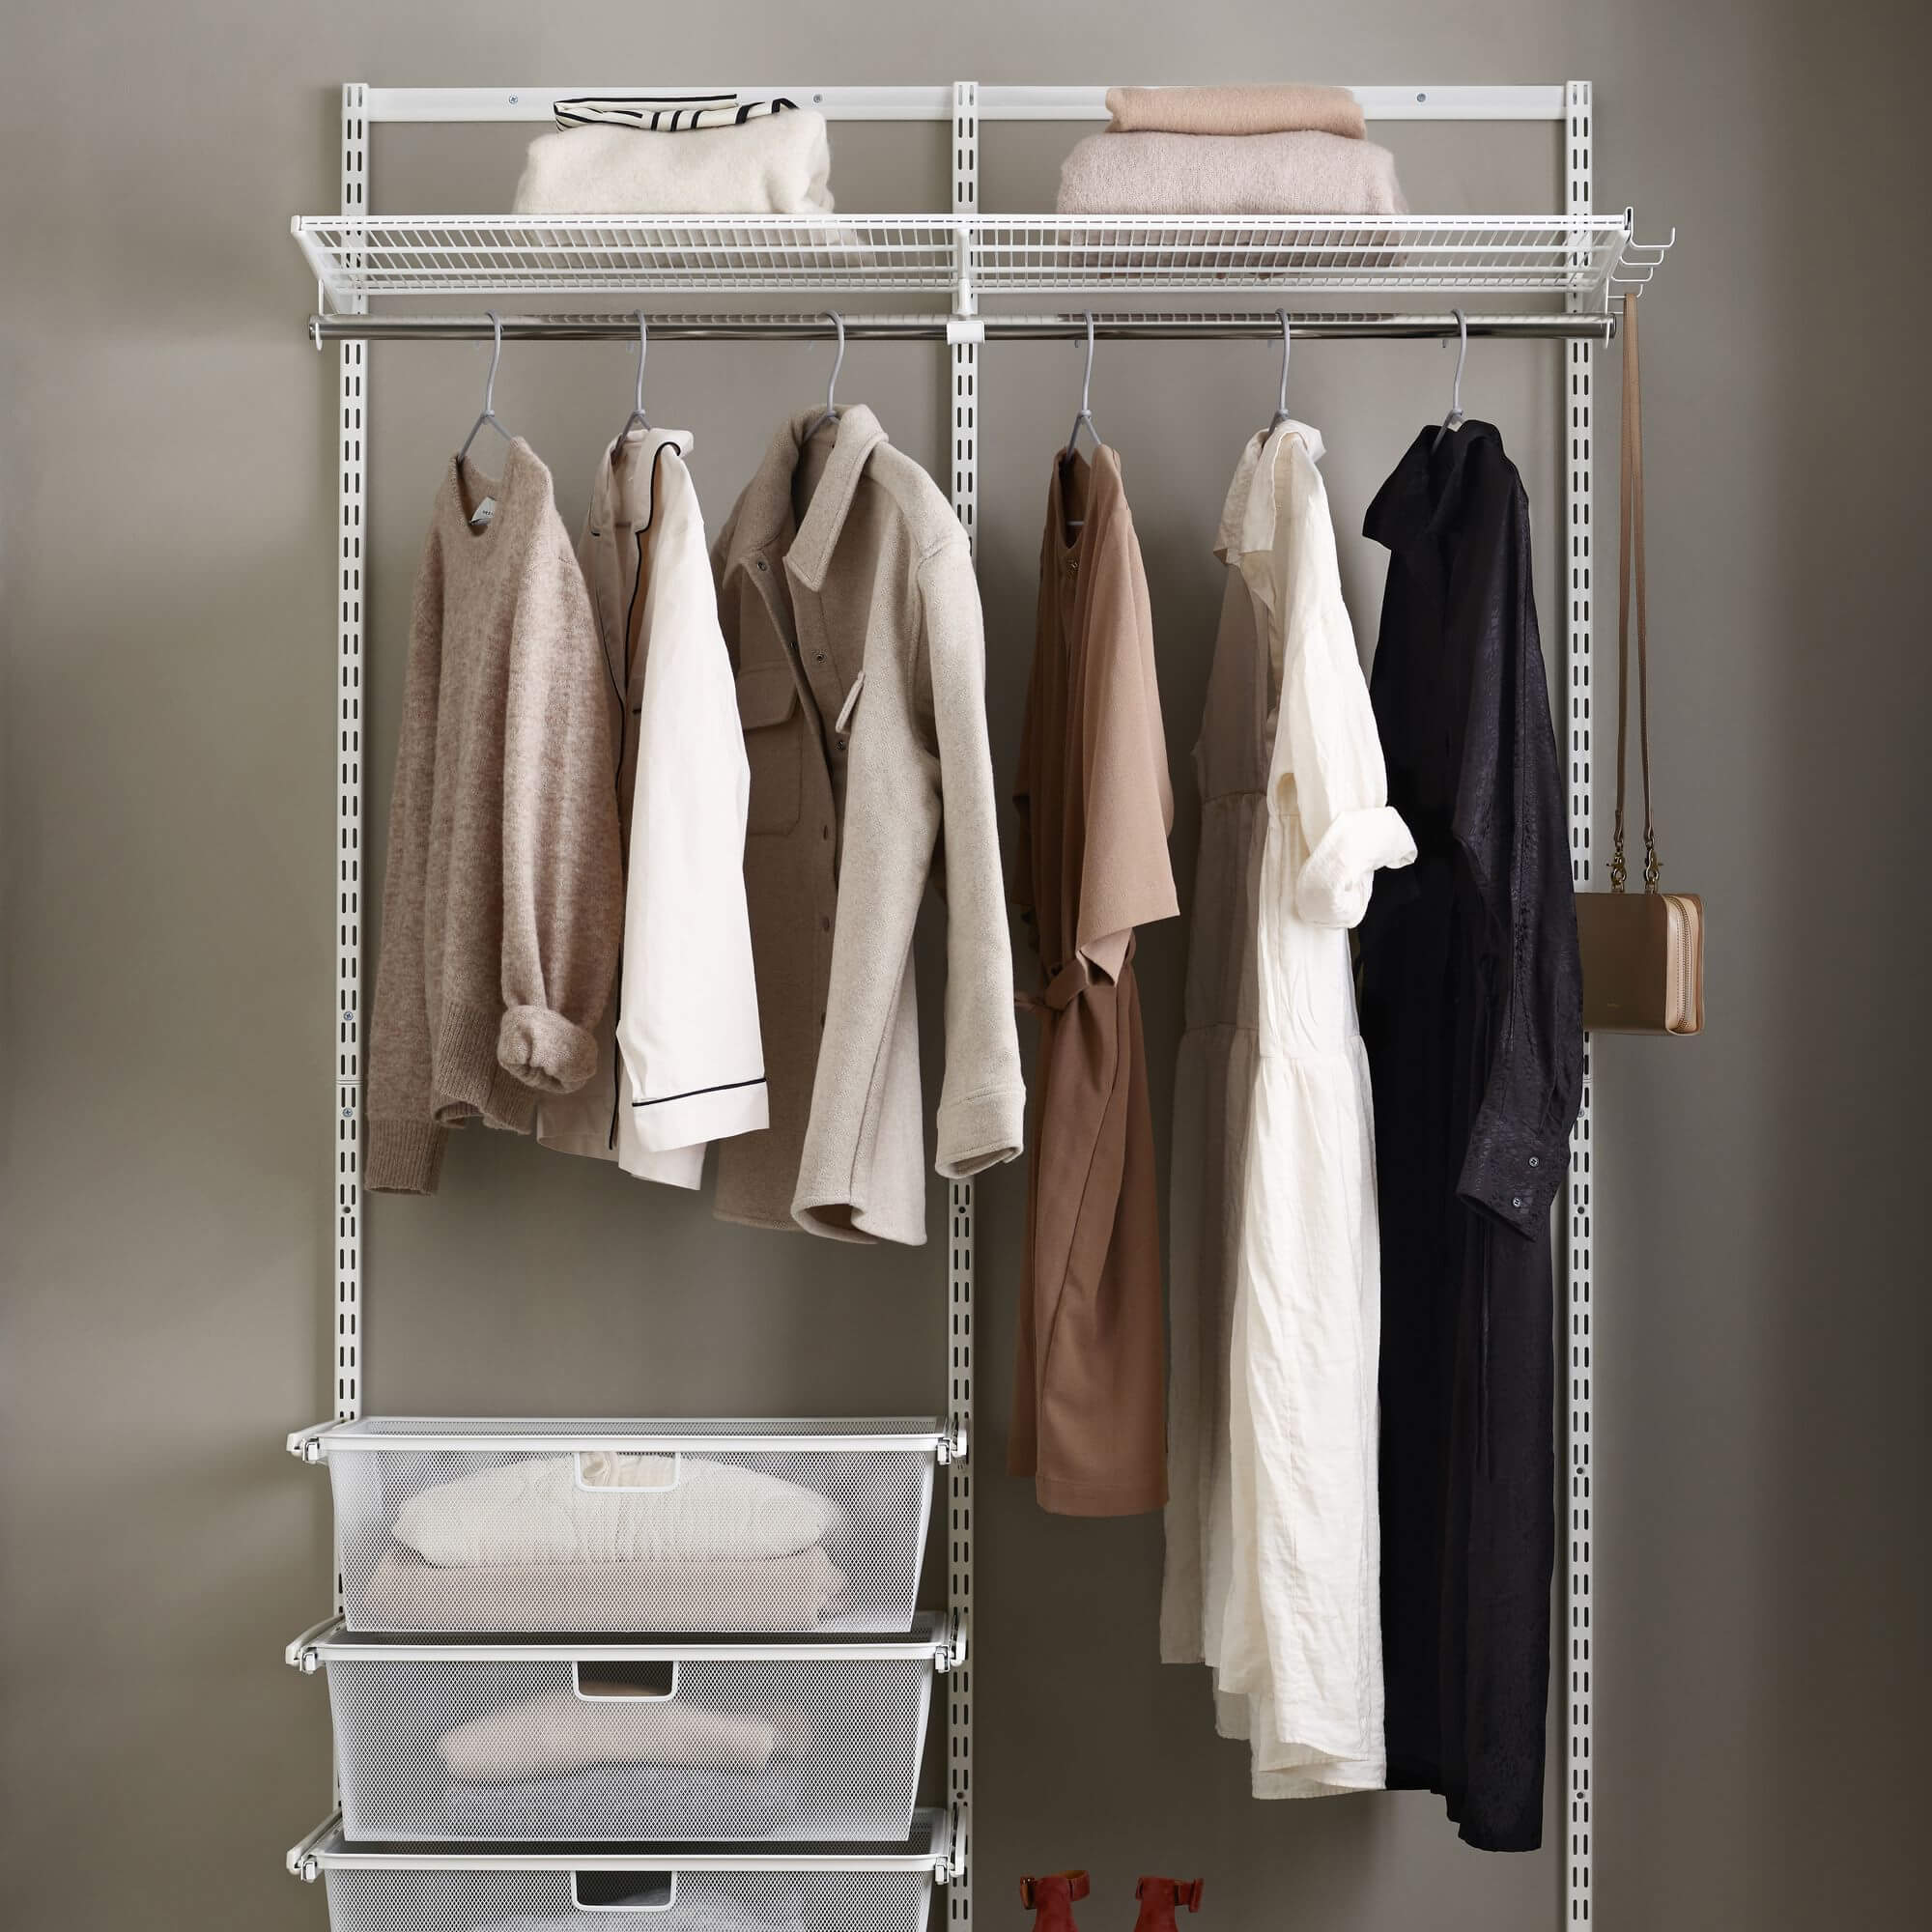 An Elfa wardrobe system with clothes hanging rail, wardrobe shelves and accessory storage